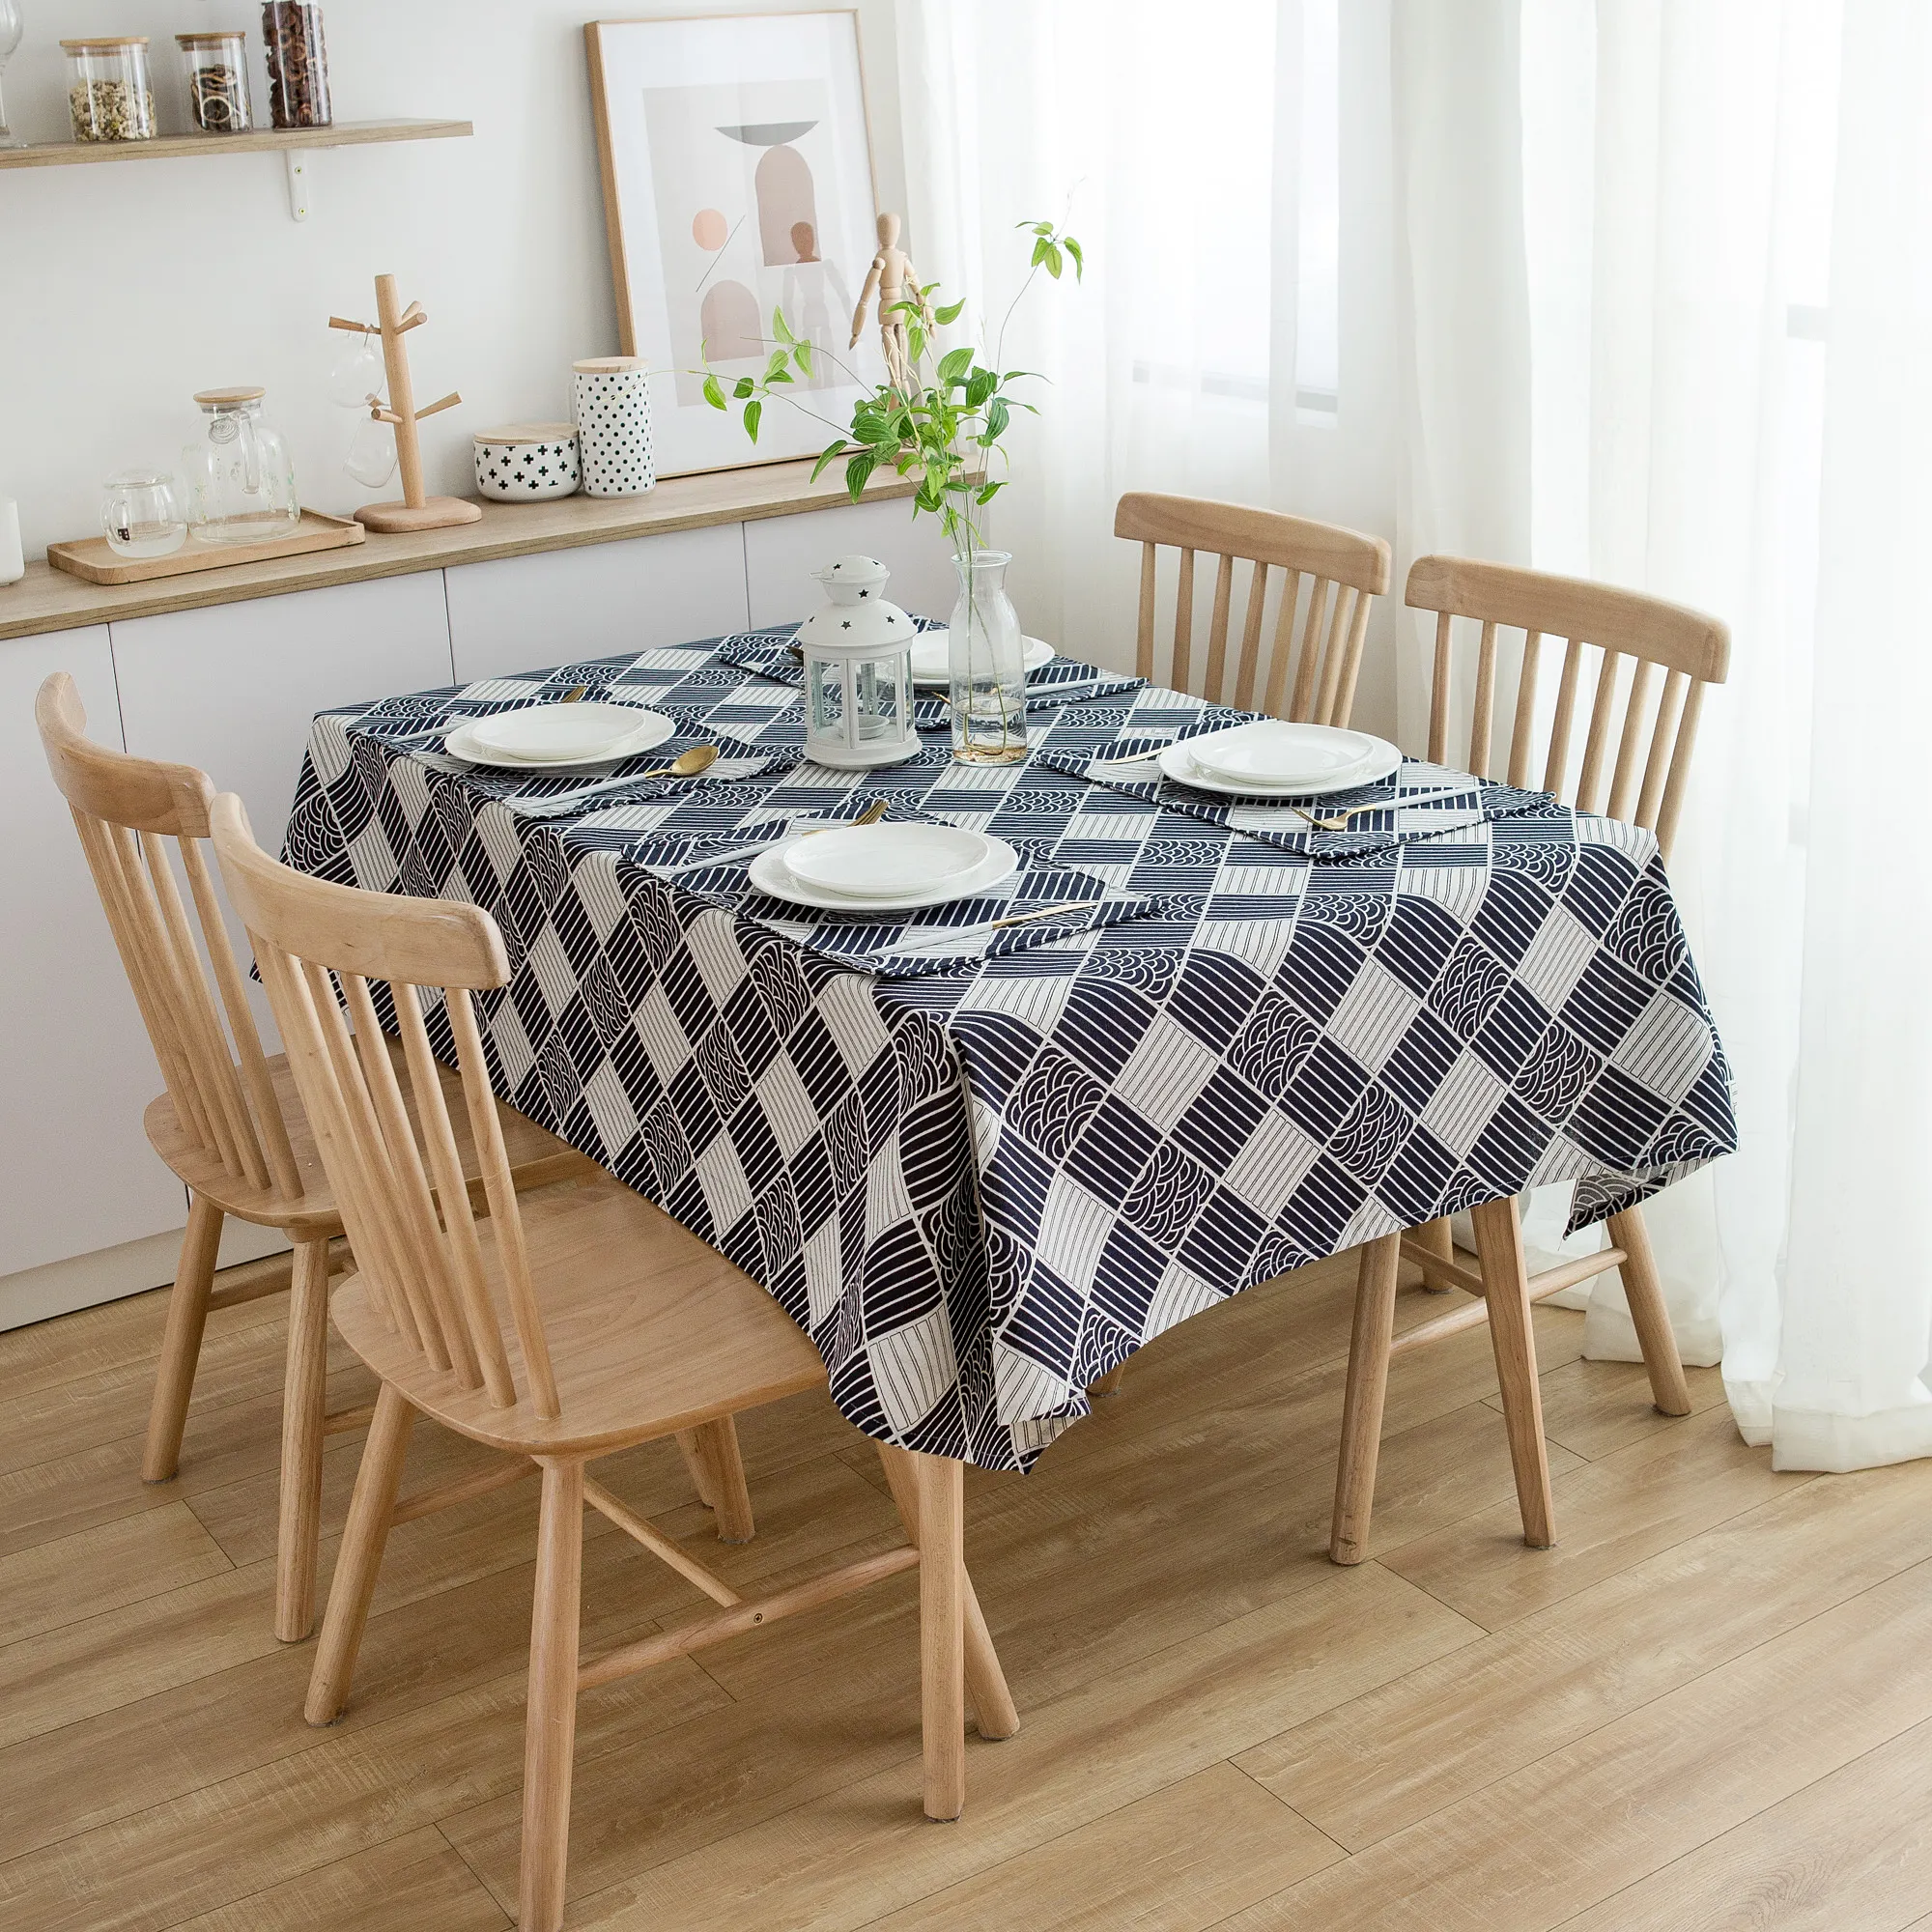 Hot sale blue color geometric pattern table cloth cover for home decoration